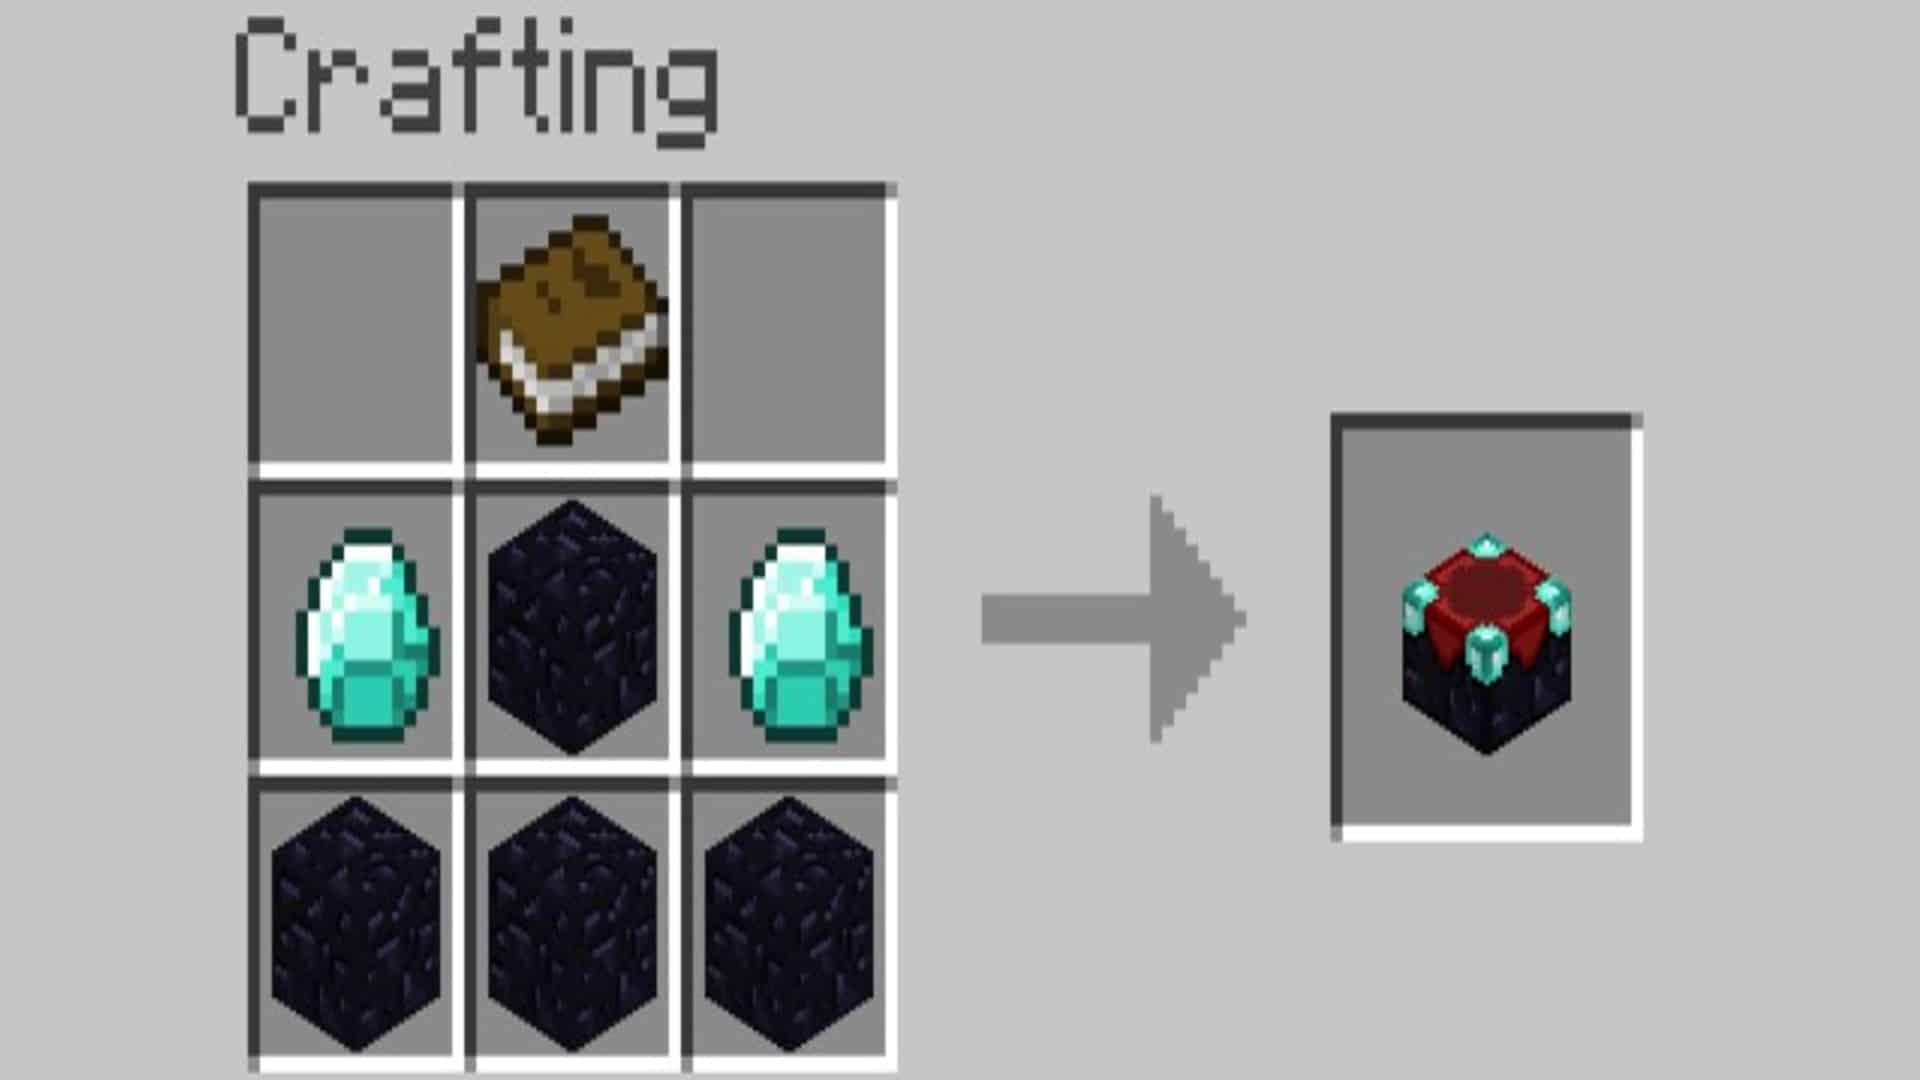 How do you get a 255 enchantment sword in Minecraft?